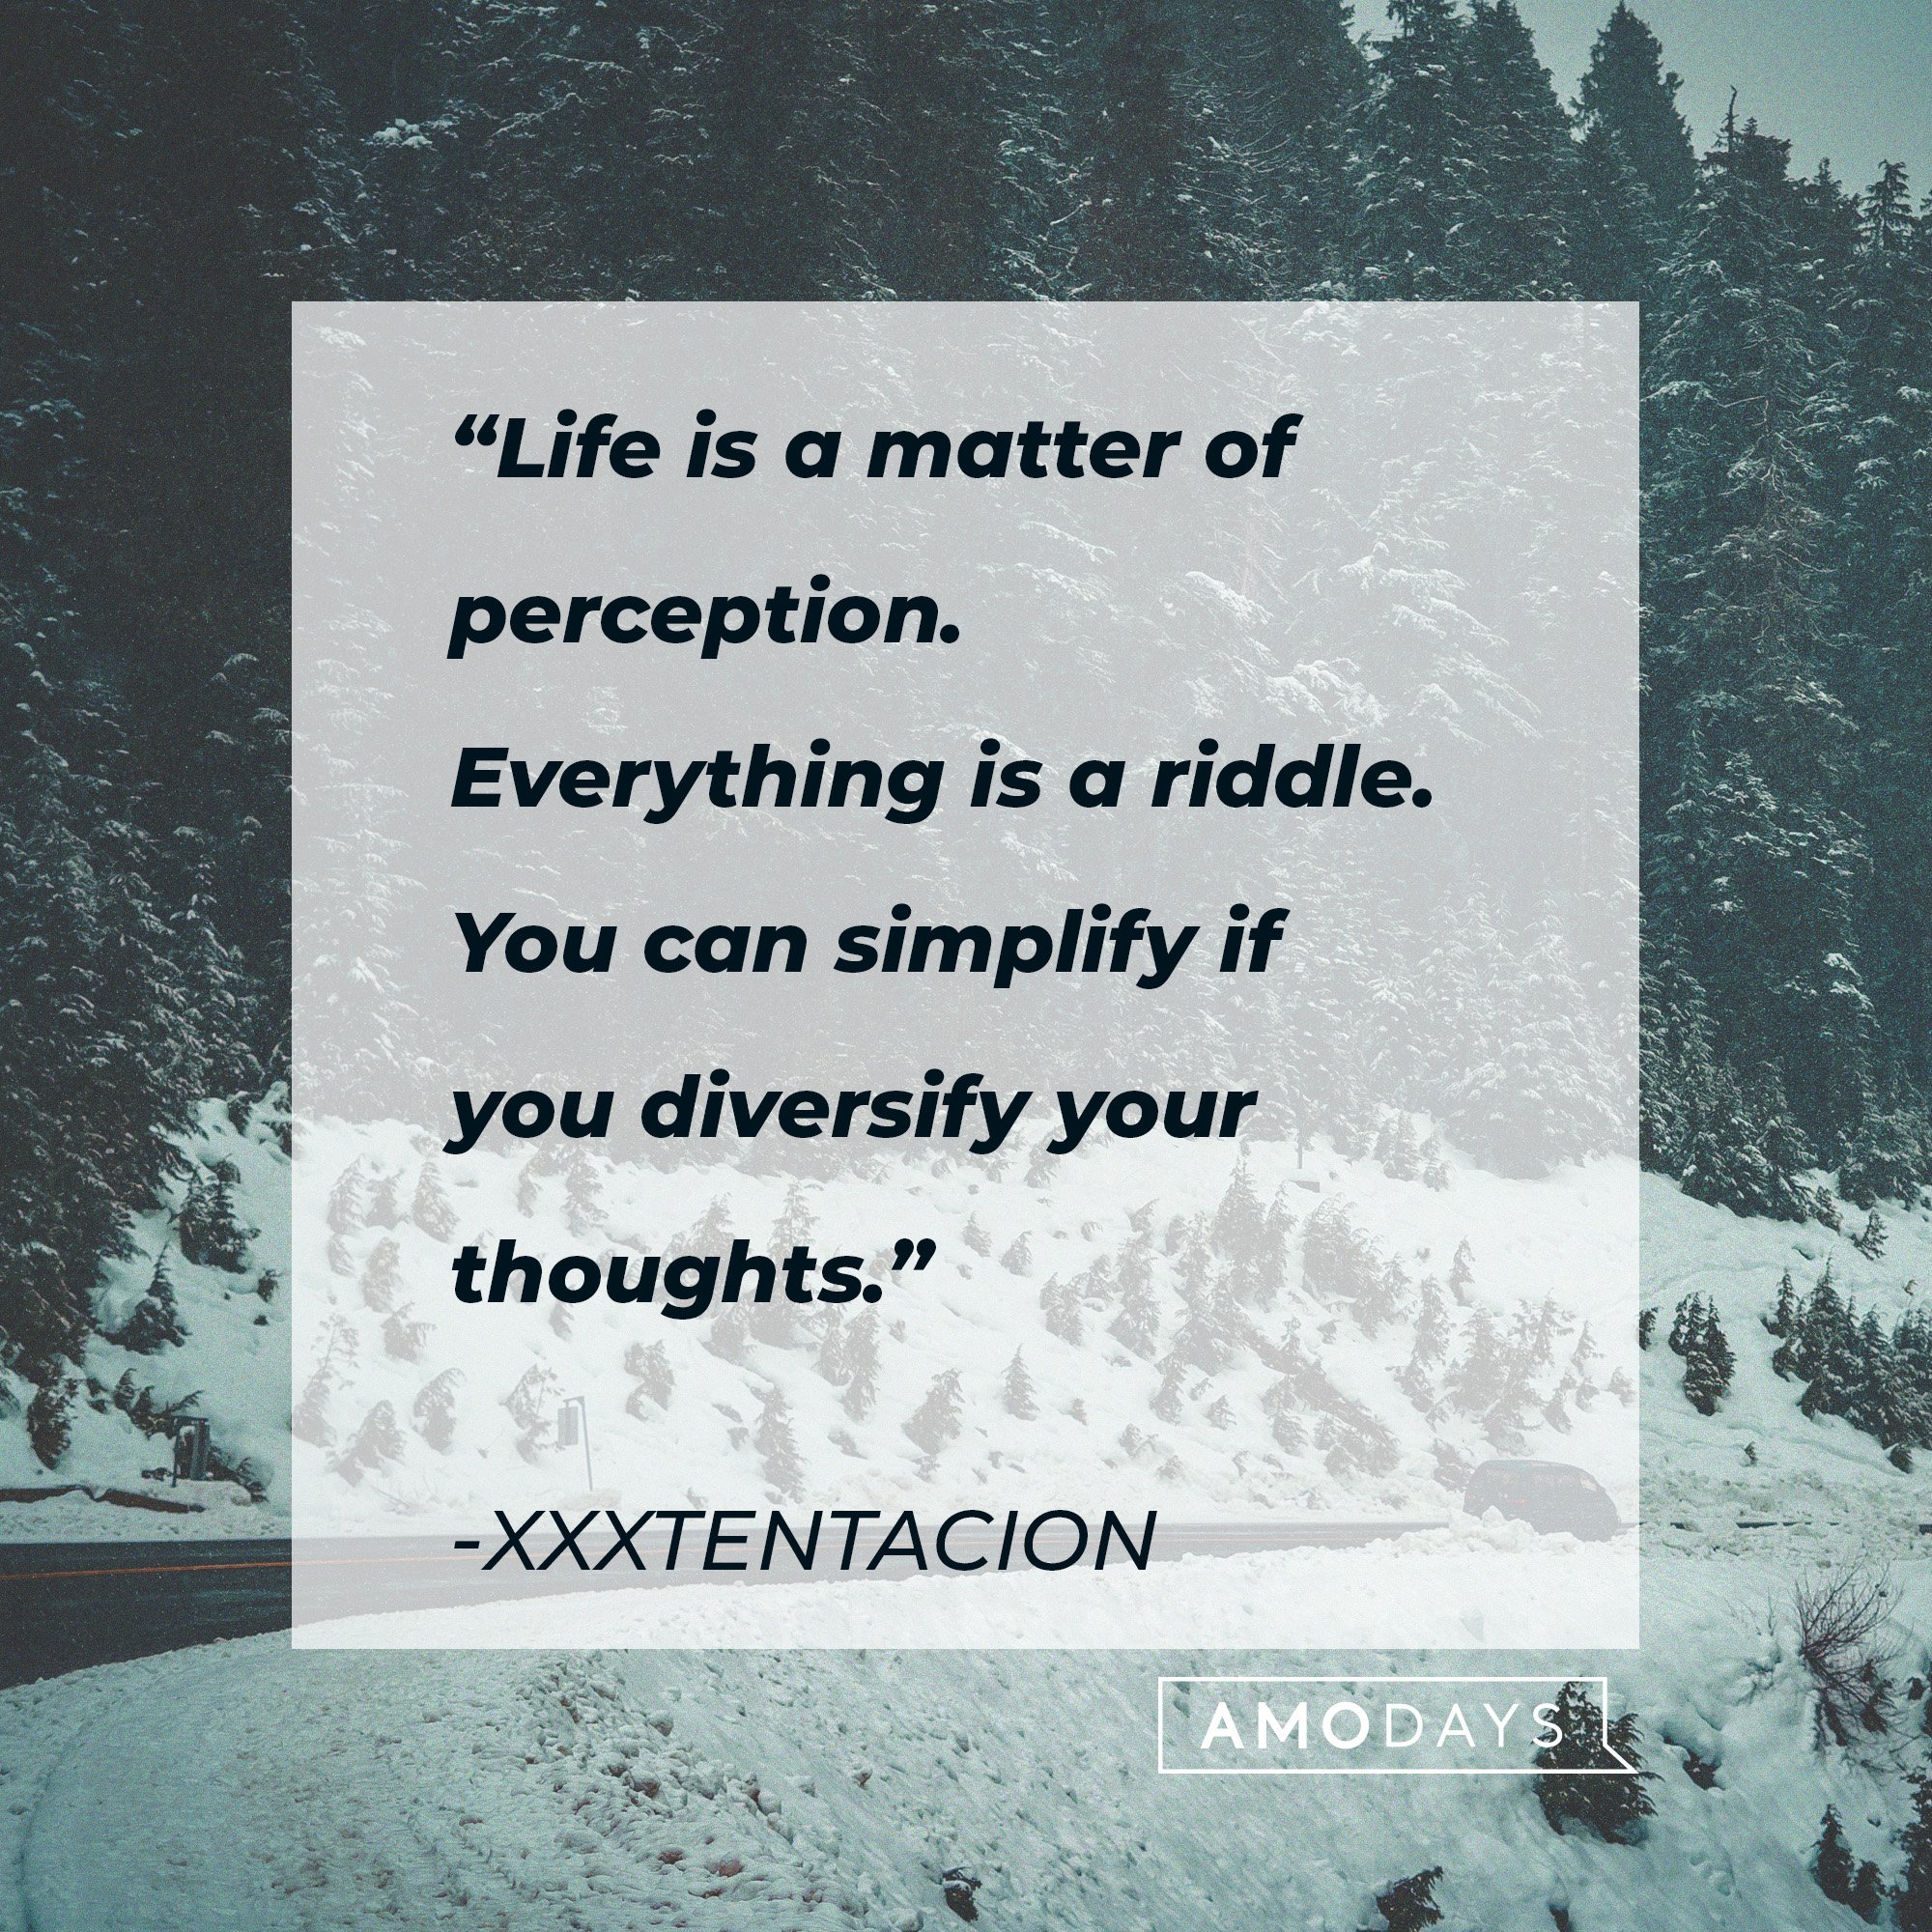 Xxxtentacion’s quote: “Life is a matter of perception. Everything is a riddle. You can simplify if you diversify your thoughts.” | Image: AmoDays